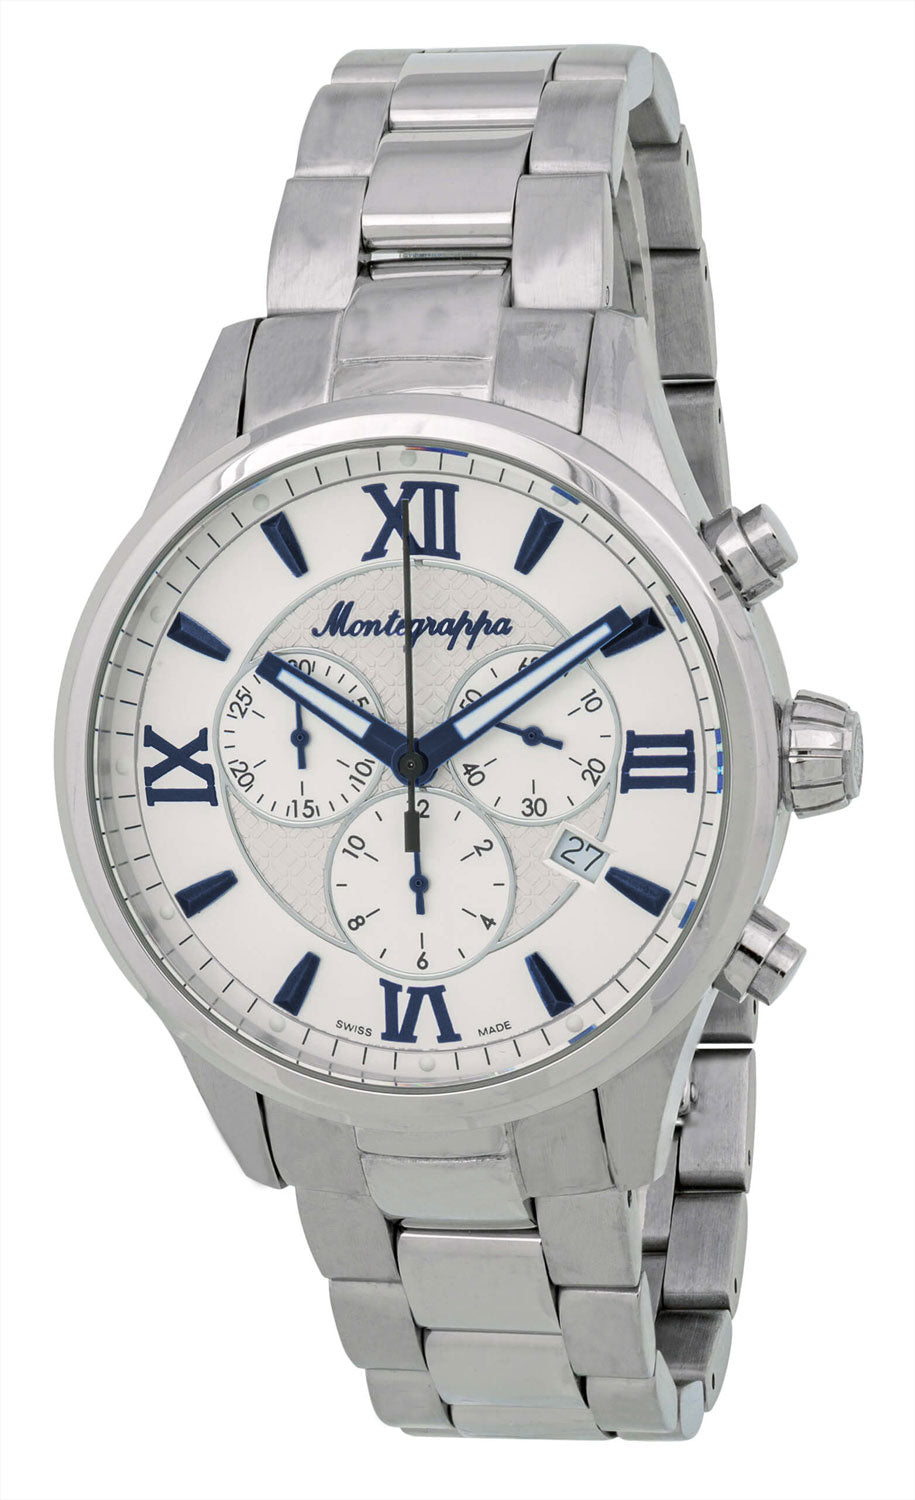 Watches - Mens-Montegrappa-IDFOWCIB-12-hour display, 40 - 45 mm, chronograph, date, Fortuna, mens, menswatches, Montegrappa, round, sale, silver-tone, stainless steel band, stainless steel case, swiss quartz, watches-Watches & Beyond